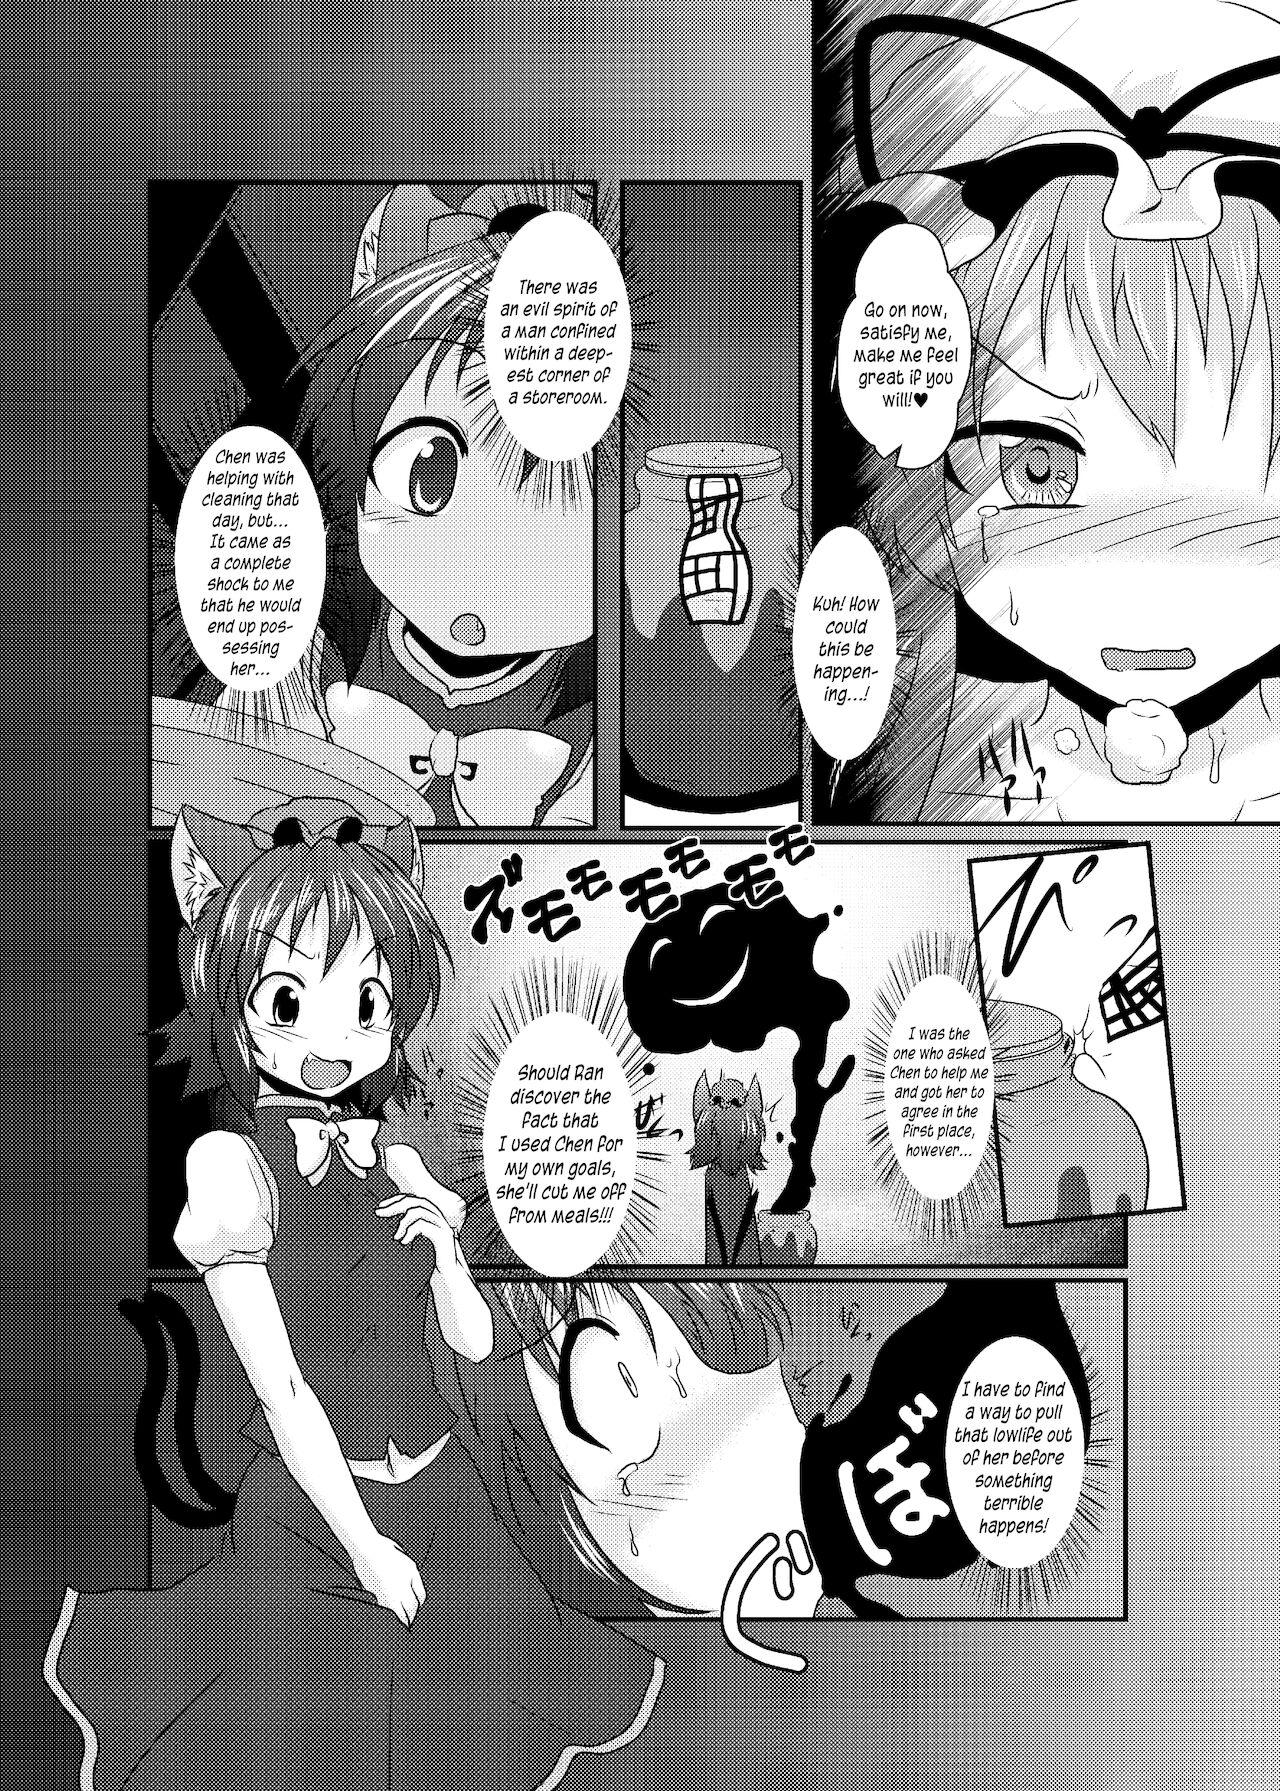 Kinky Chotto Tsukarechatta Mitai | I think I'm a little possessed! - Touhou project Interracial - Page 4